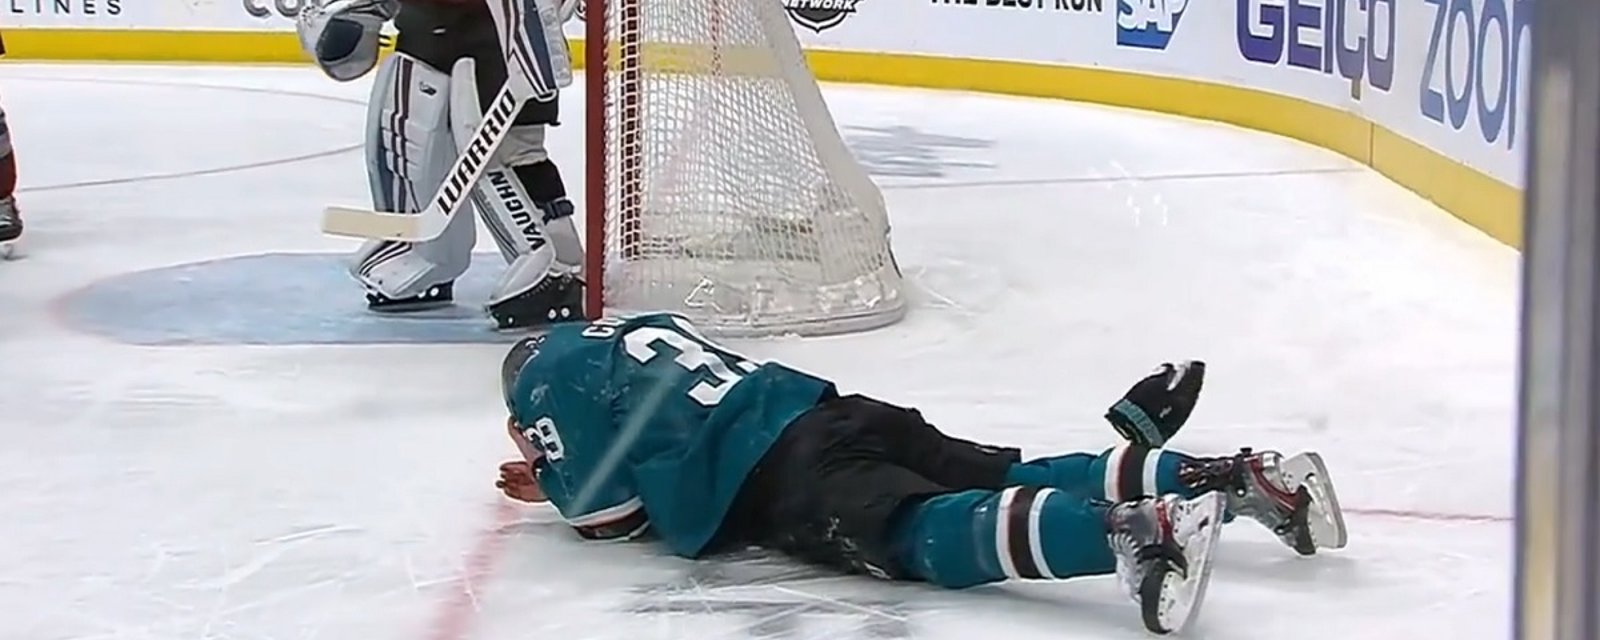 Logan Couture knocked out of the game after taking another puck to the face.